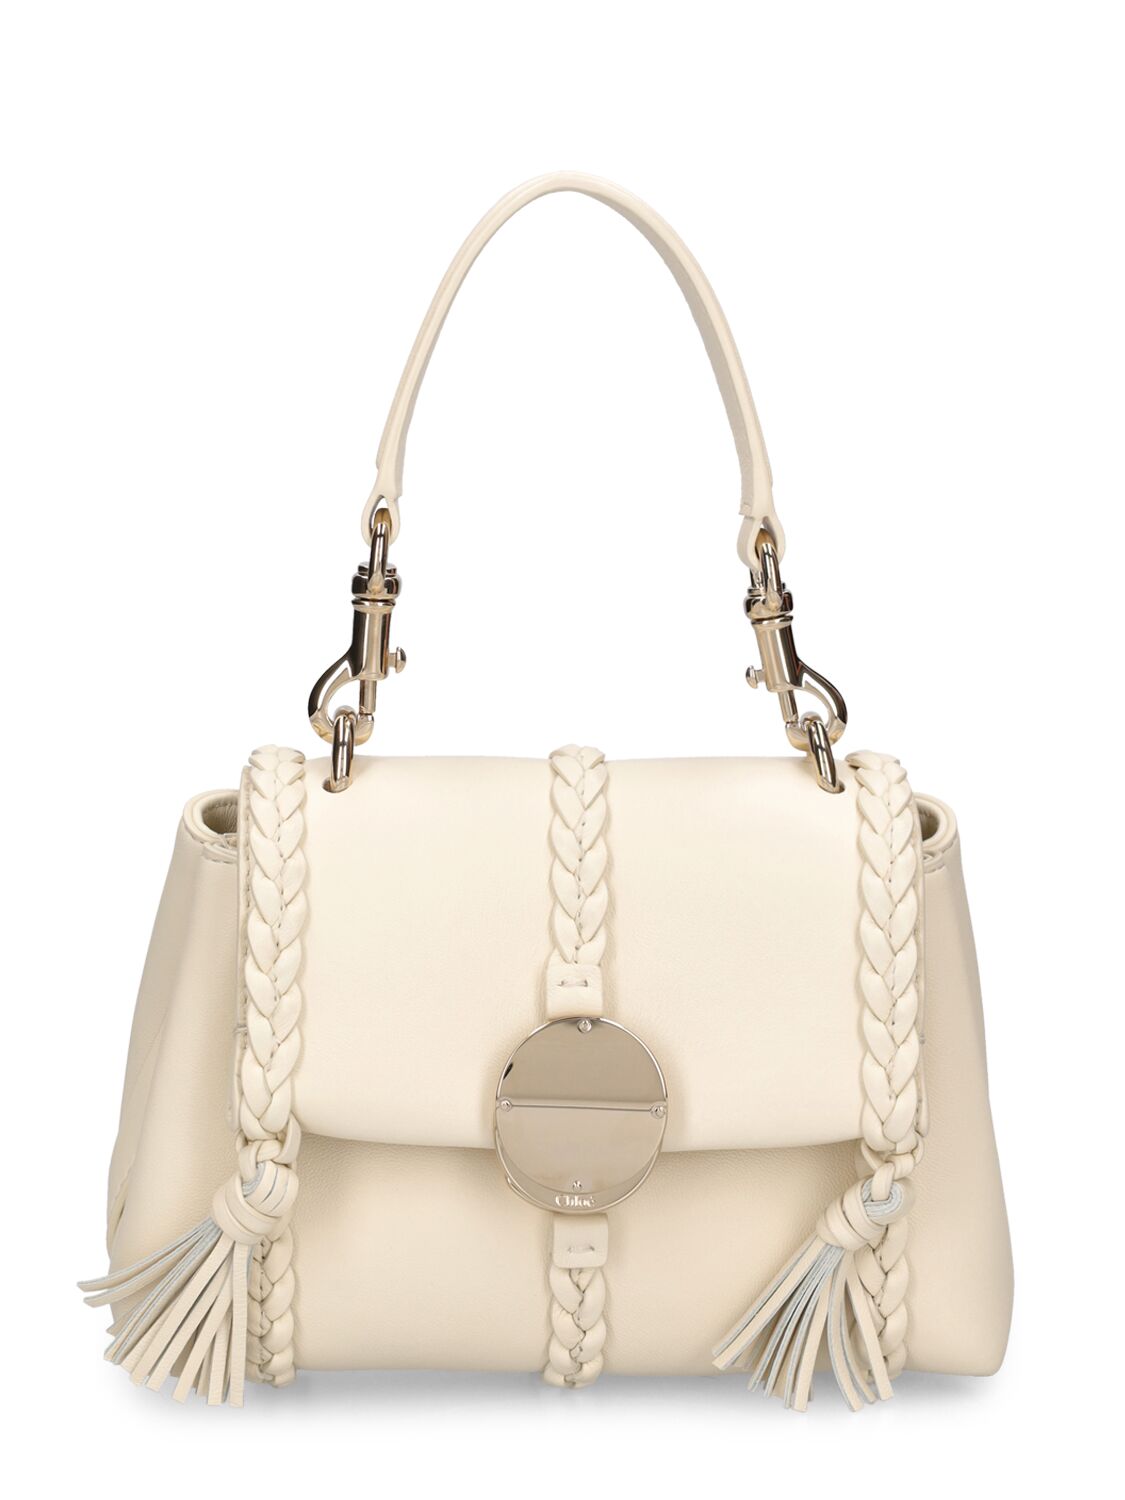 CHLOÉ SMALL PENELOPE LEATHER TOP HANDLE BAG